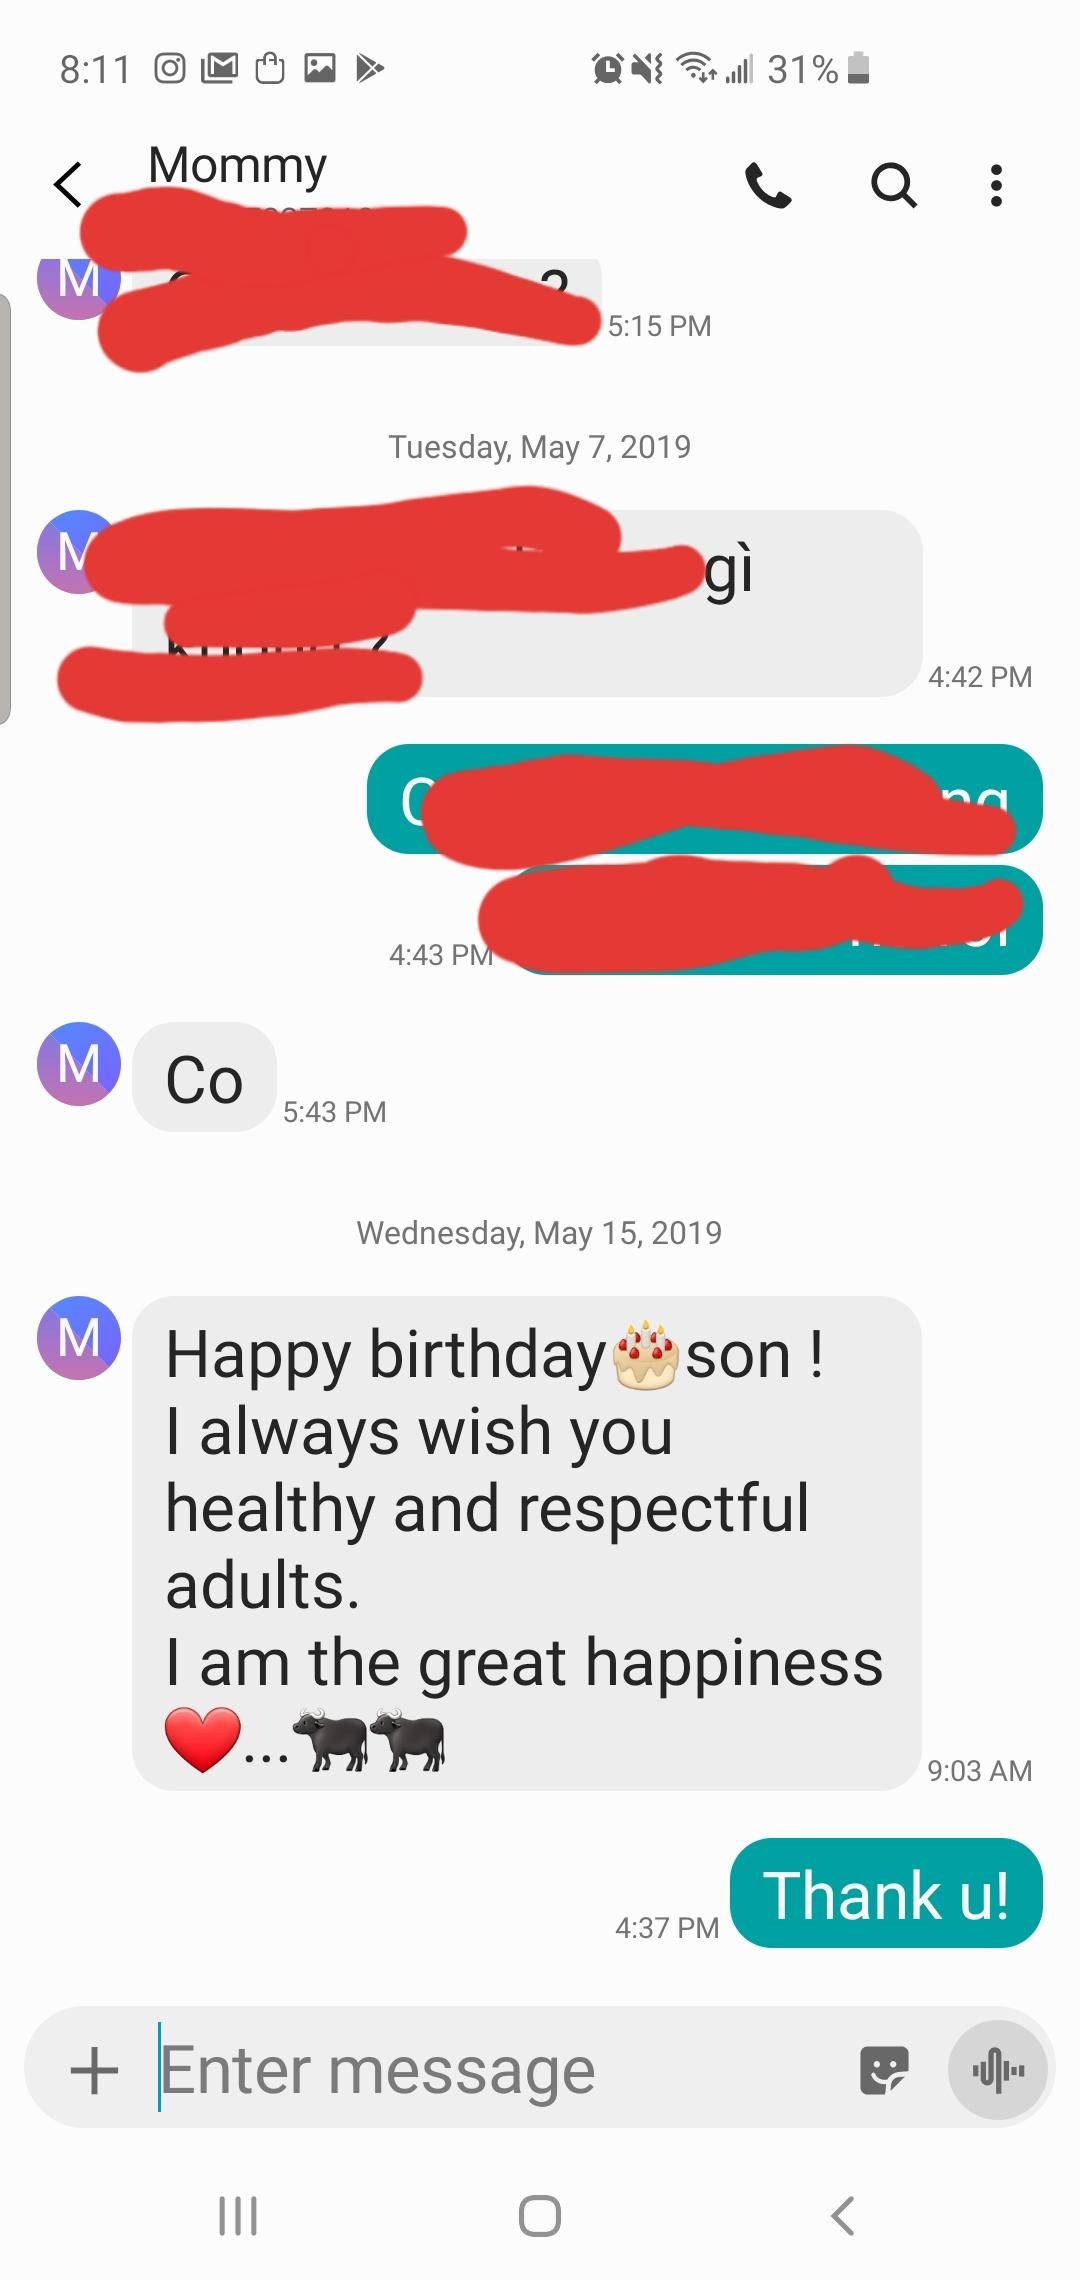 Its my birthday today. My parents dont speak english well and this was my moms attempt to wish me a happy b-day